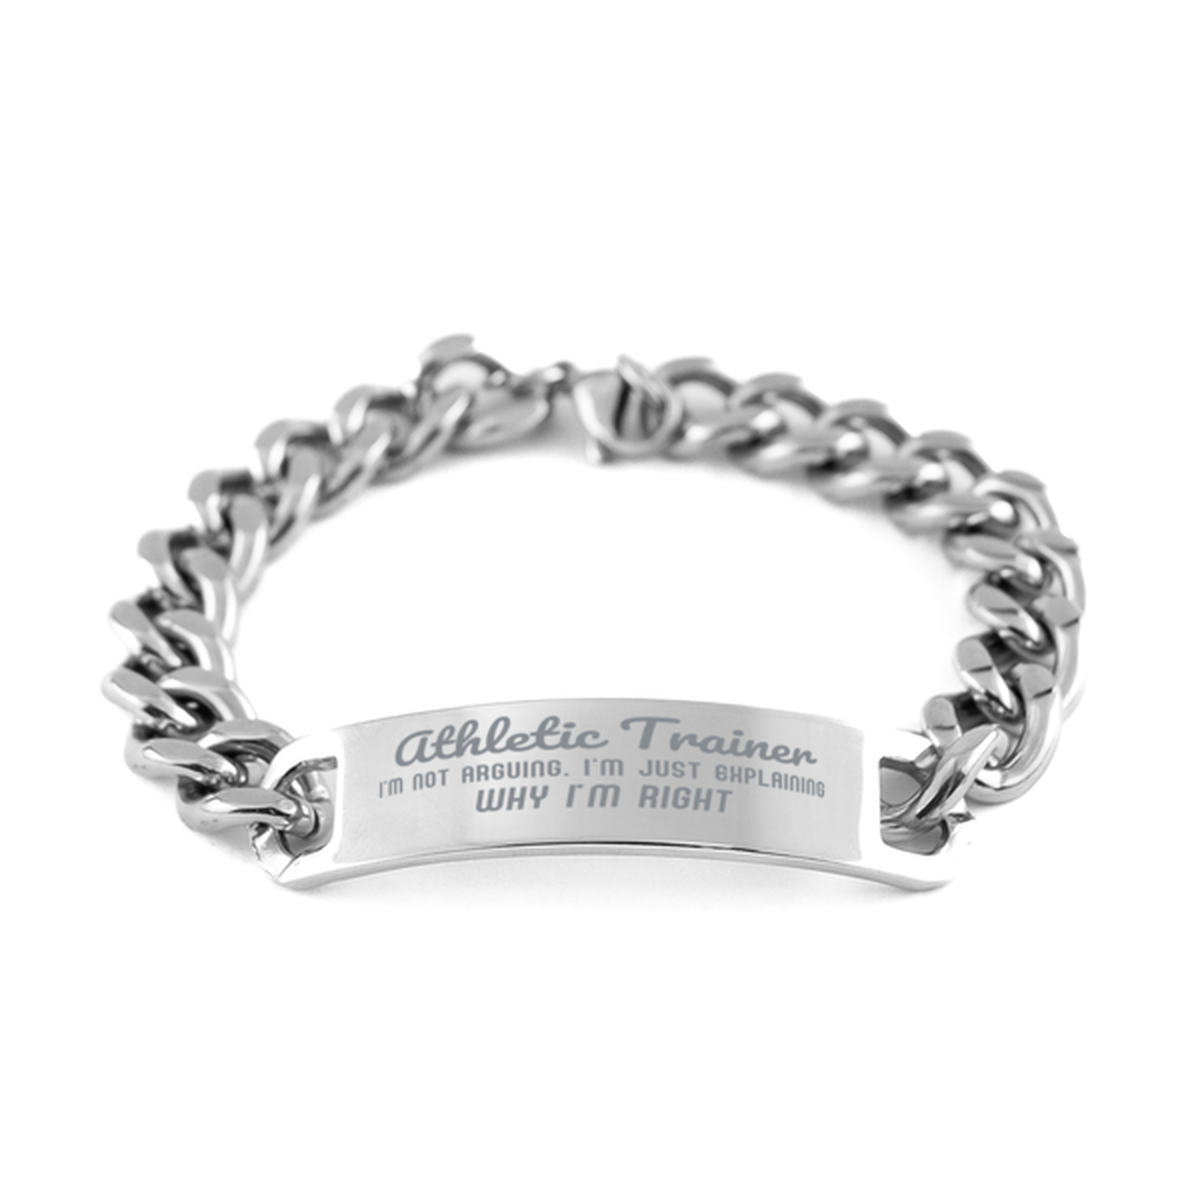 Athletic Trainer I'm not Arguing. I'm Just Explaining Why I'm RIGHT Cuban Chain Stainless Steel Bracelet, Graduation Birthday Christmas Athletic Trainer Gifts For Athletic Trainer Funny Saying Quote Present for Men Women Coworker